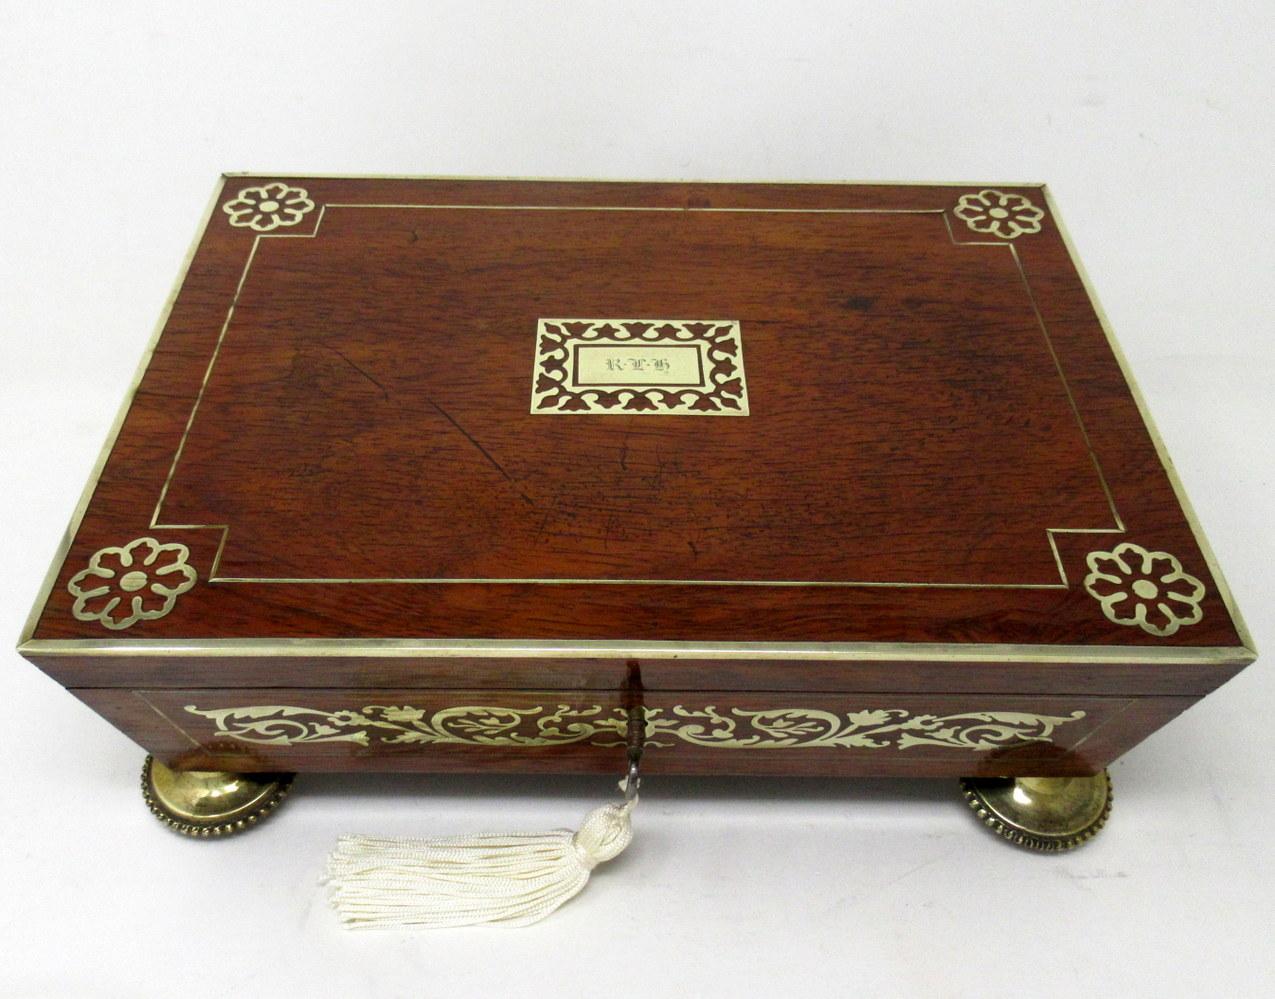 An exceptionally fine quality example of a Lady’s or Gentleman’s English Regency Period polished brass mounted Flame Mahogany Inlaid Boulle Style Jewellery or Trinket Casket or Table Box made during the first quarter of the Nineteenth Century, of